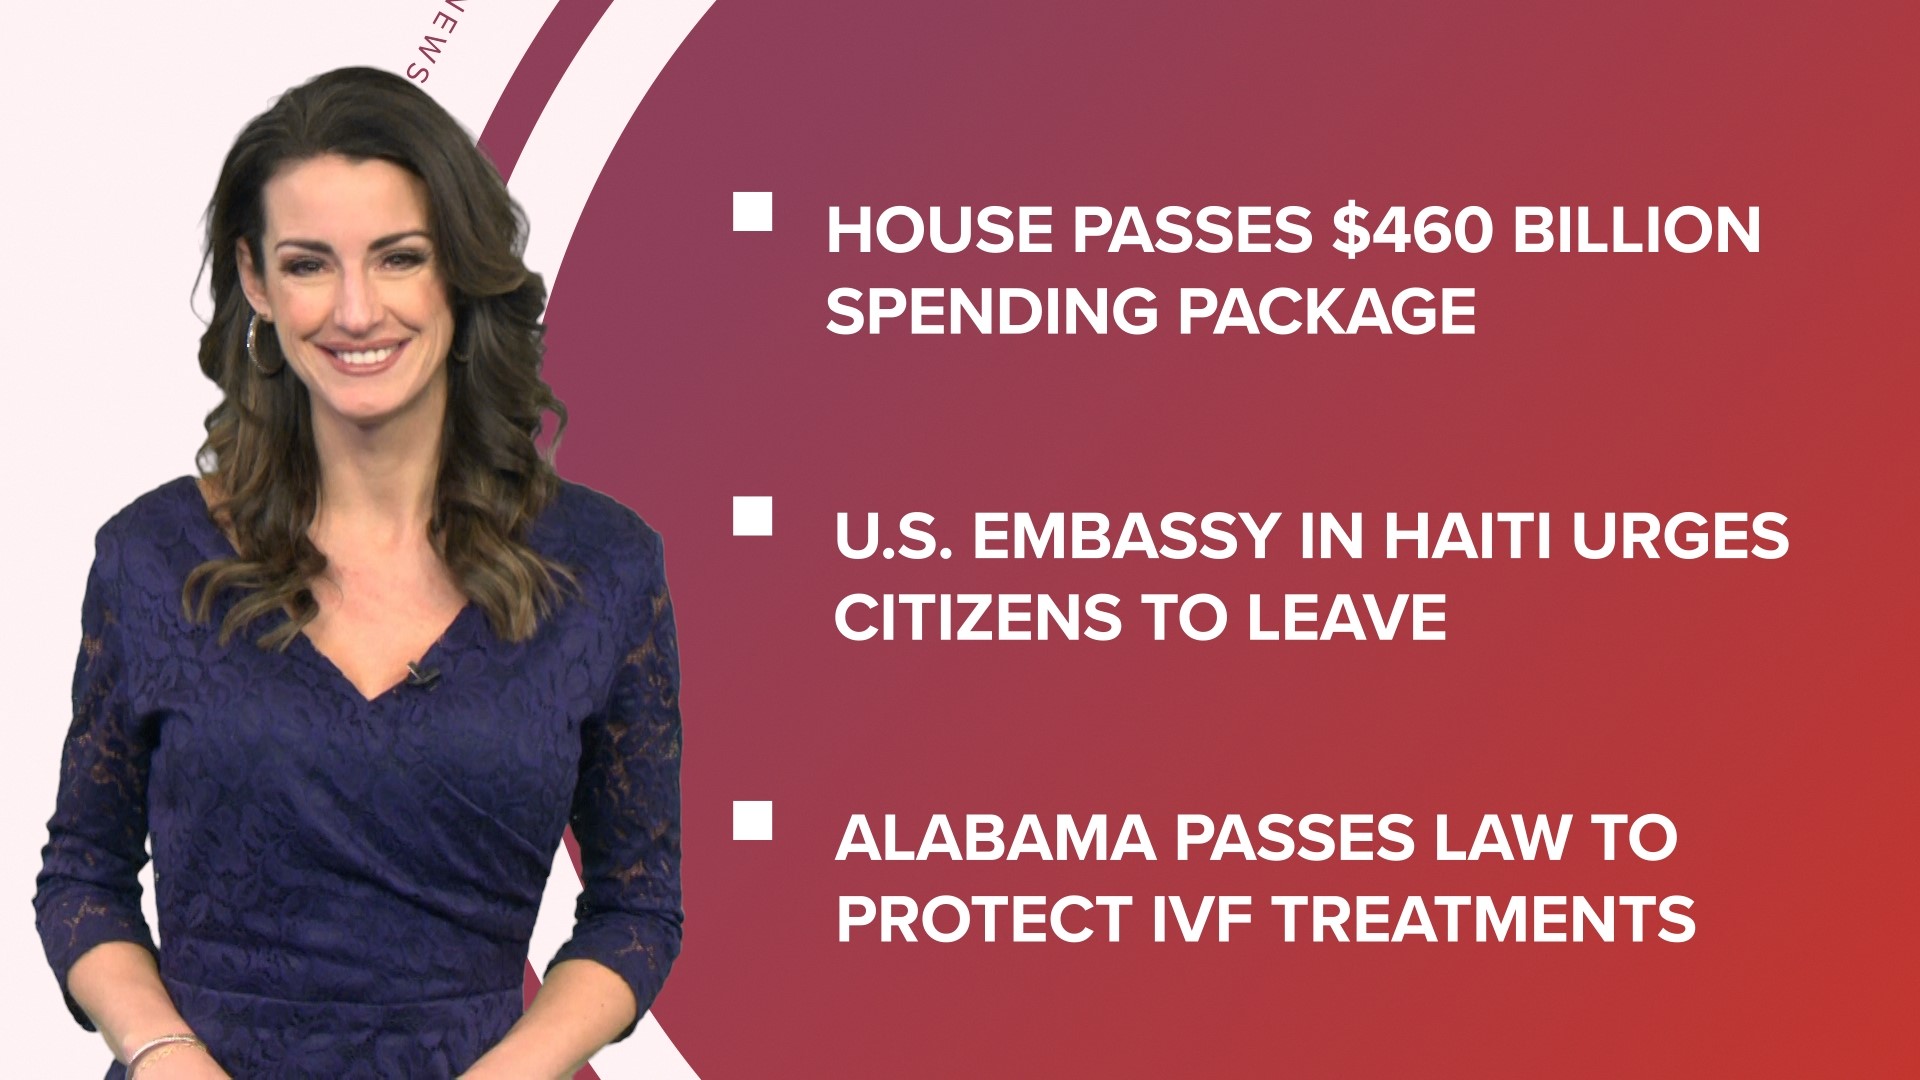 A look at what is happening in the news from the House passing spending bills to a healthcare cyberattack and new Barbie dolls for the 65th anniversary.